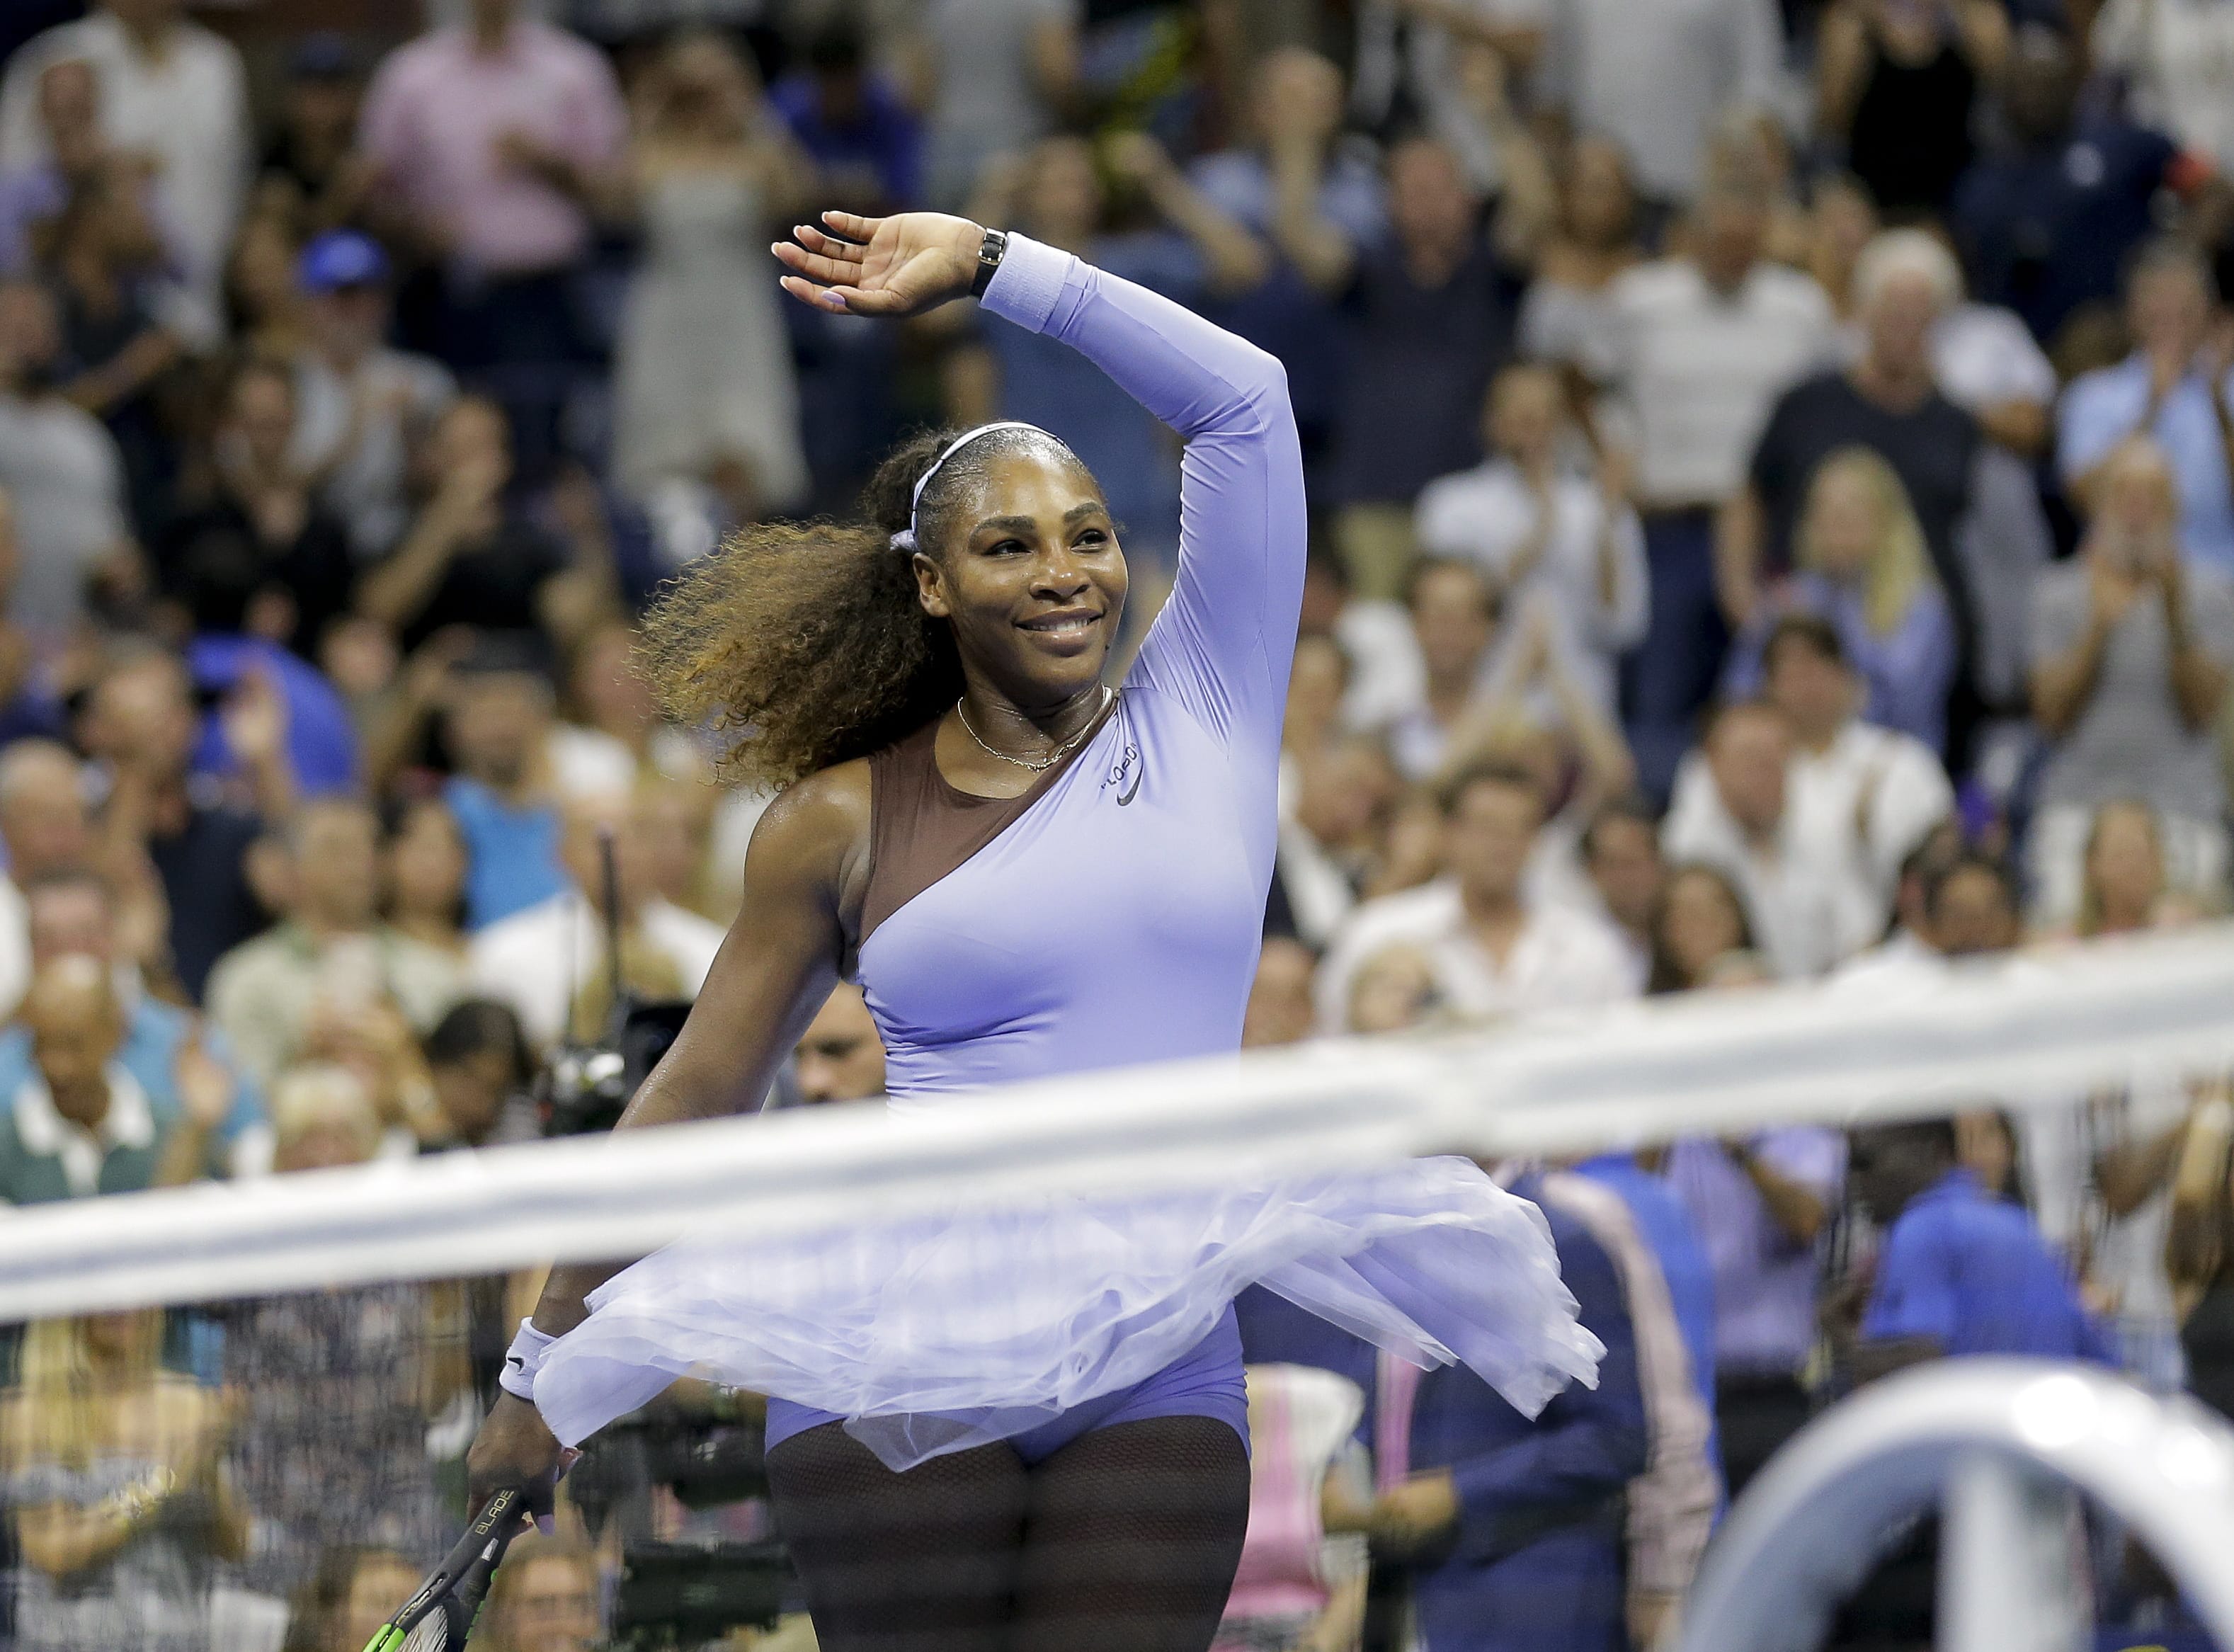 Serena Williams was named The Associated Press Female Athlete of the Year on Wednesday, Dec. 26, 2018.